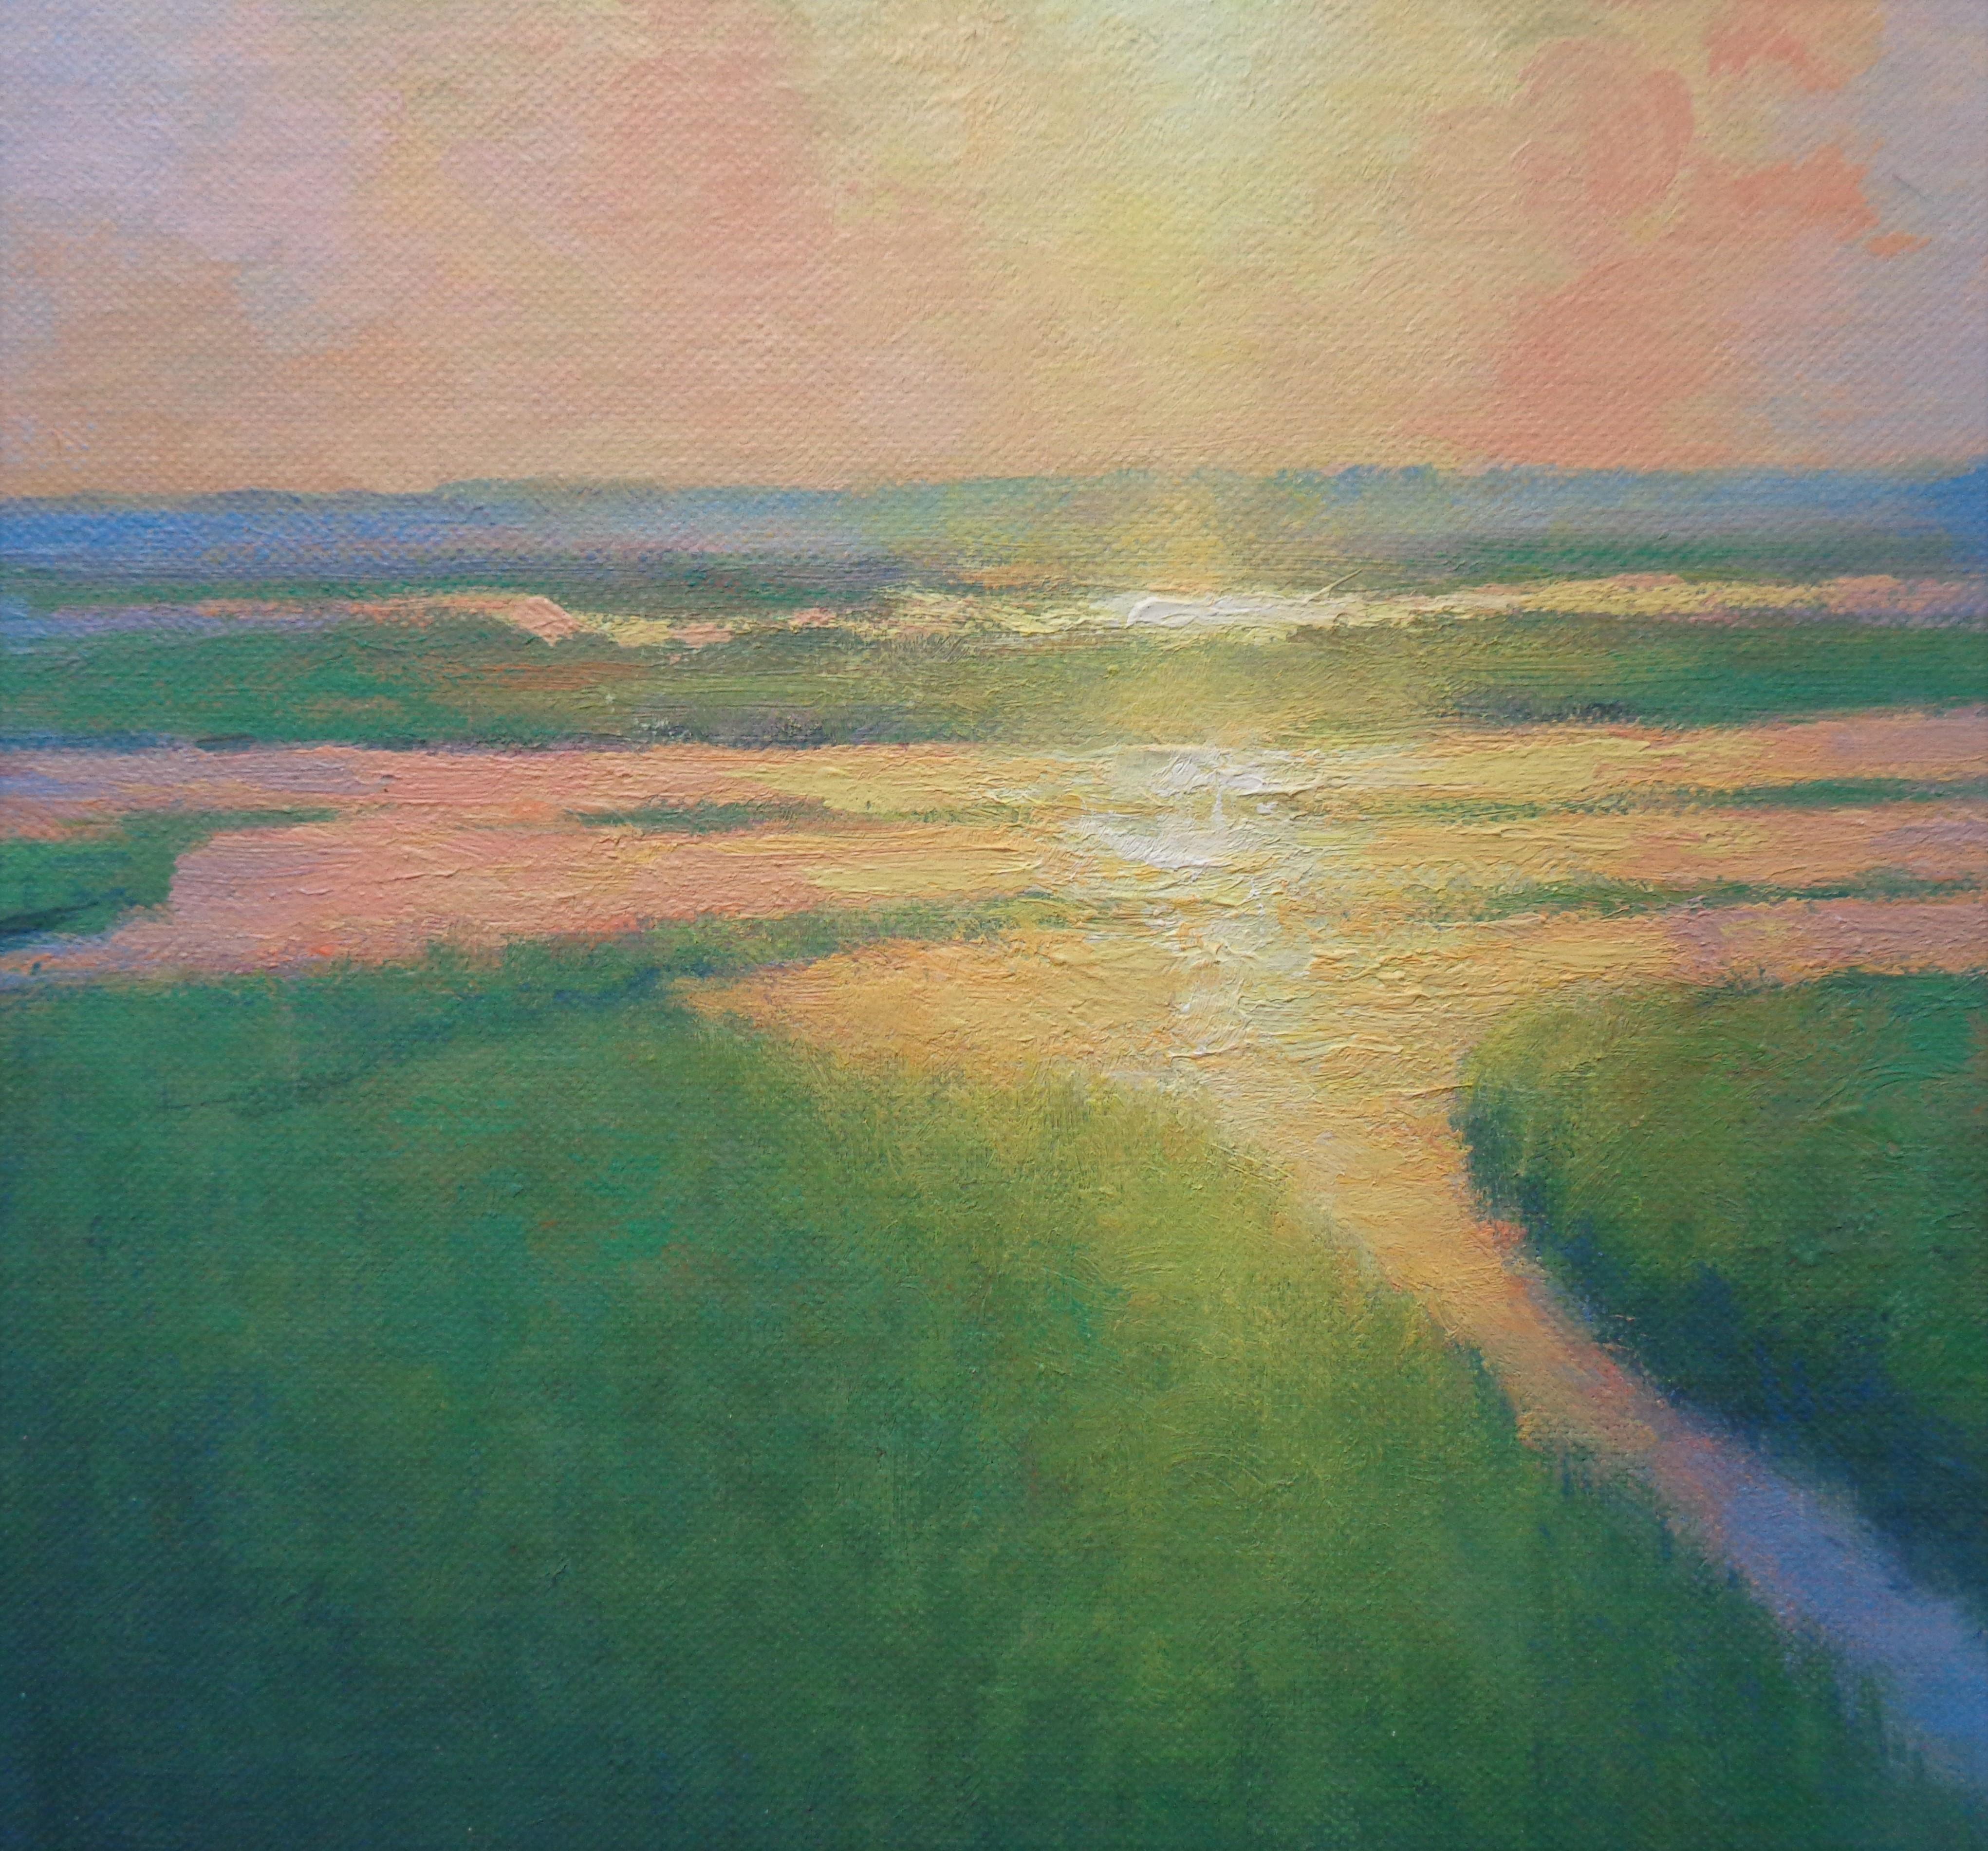  Ocean Impressionistic Seascape Painting Michael Budden Morning Marsh Light II For Sale 2